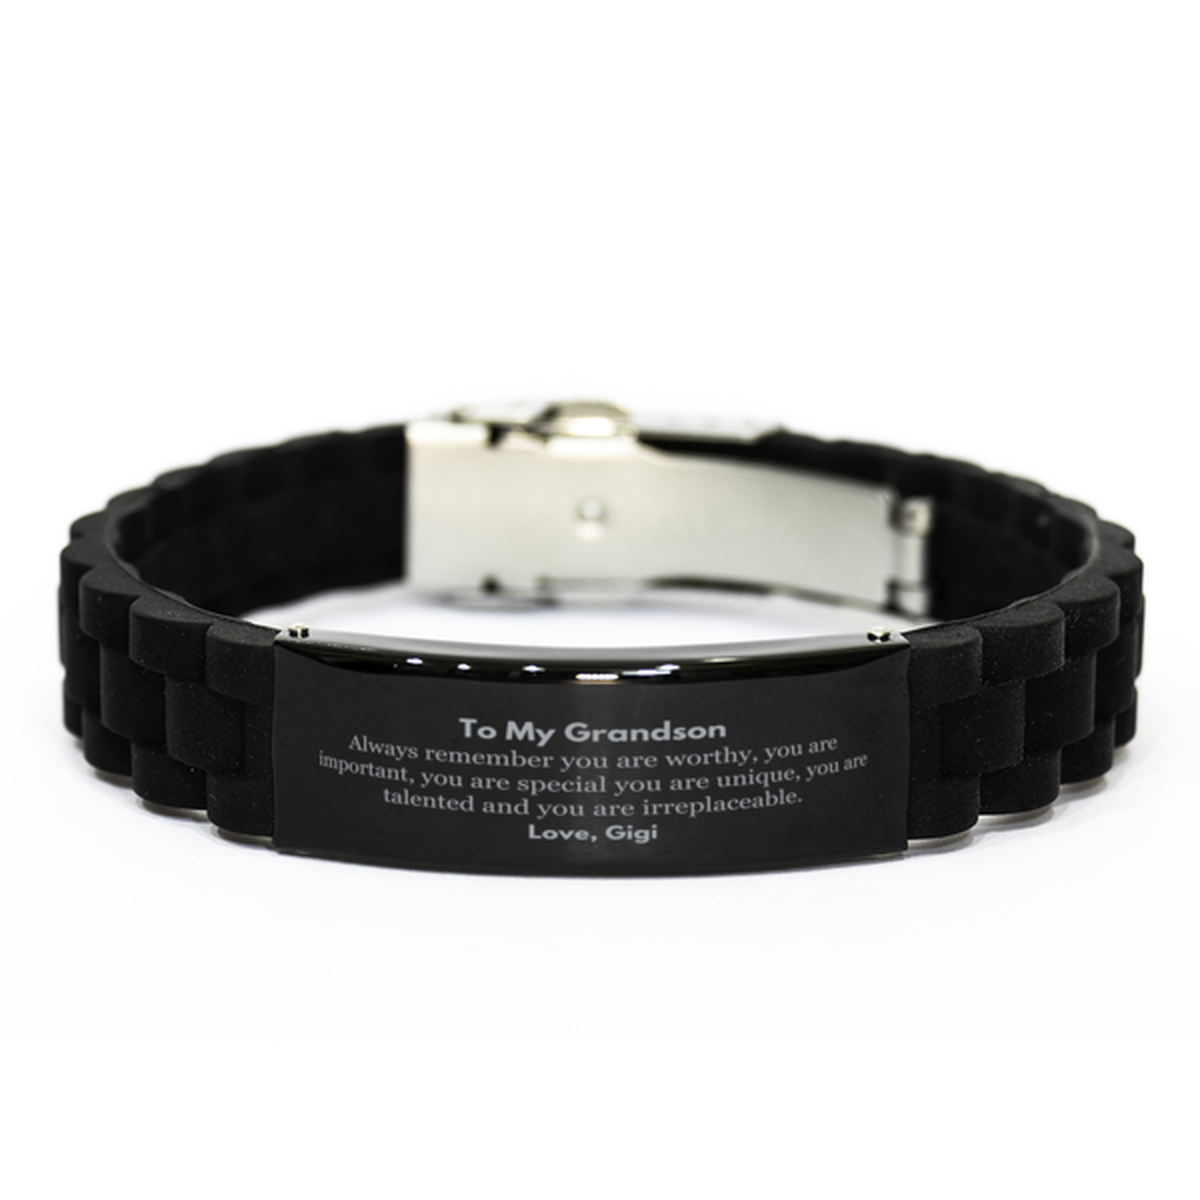 Grandson Birthday Gifts from Gigi, Inspirational Black Glidelock Clasp Bracelet for Grandson Christmas Graduation Gifts for Grandson Always remember you are worthy, you are important. Love, Gigi